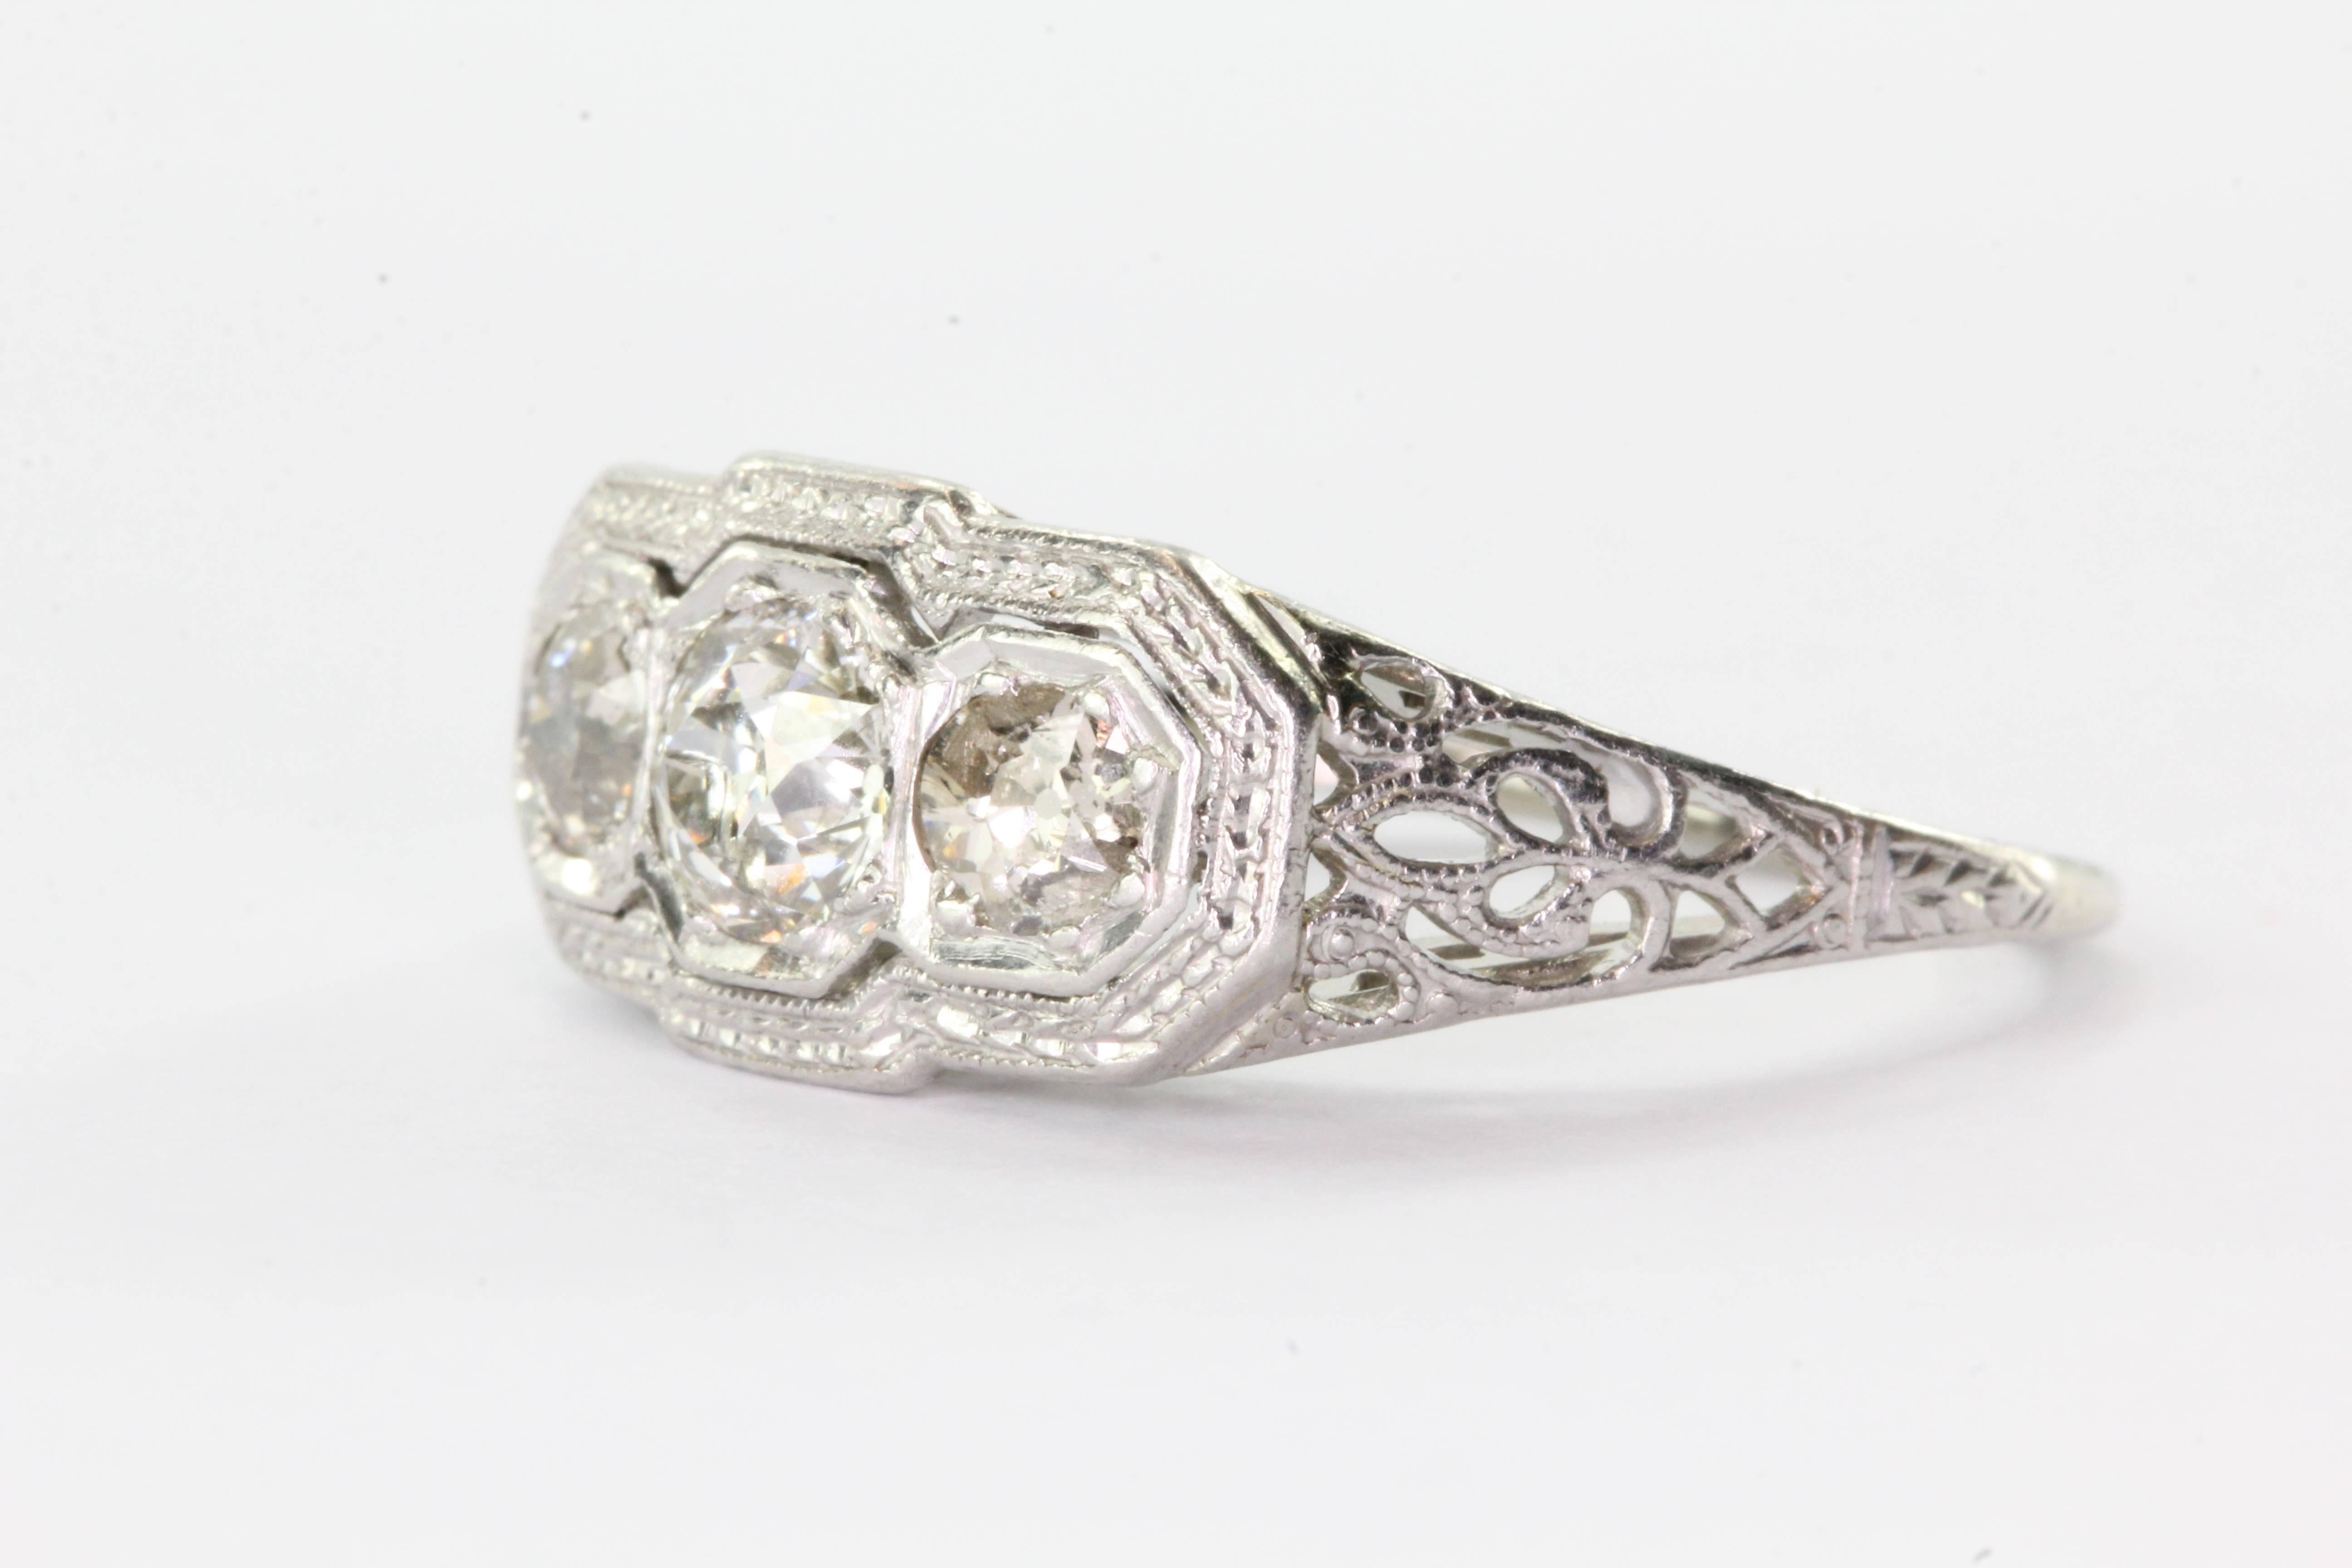 Antique Art Nouveau 18K White Gold & Platinum 3 Stone Diamond Engagement Ring. The ring is in excellent estate condition and ready to wear. Most of the ring is 18K white gold but the diamonds are set in platinum. The ring is set with three old